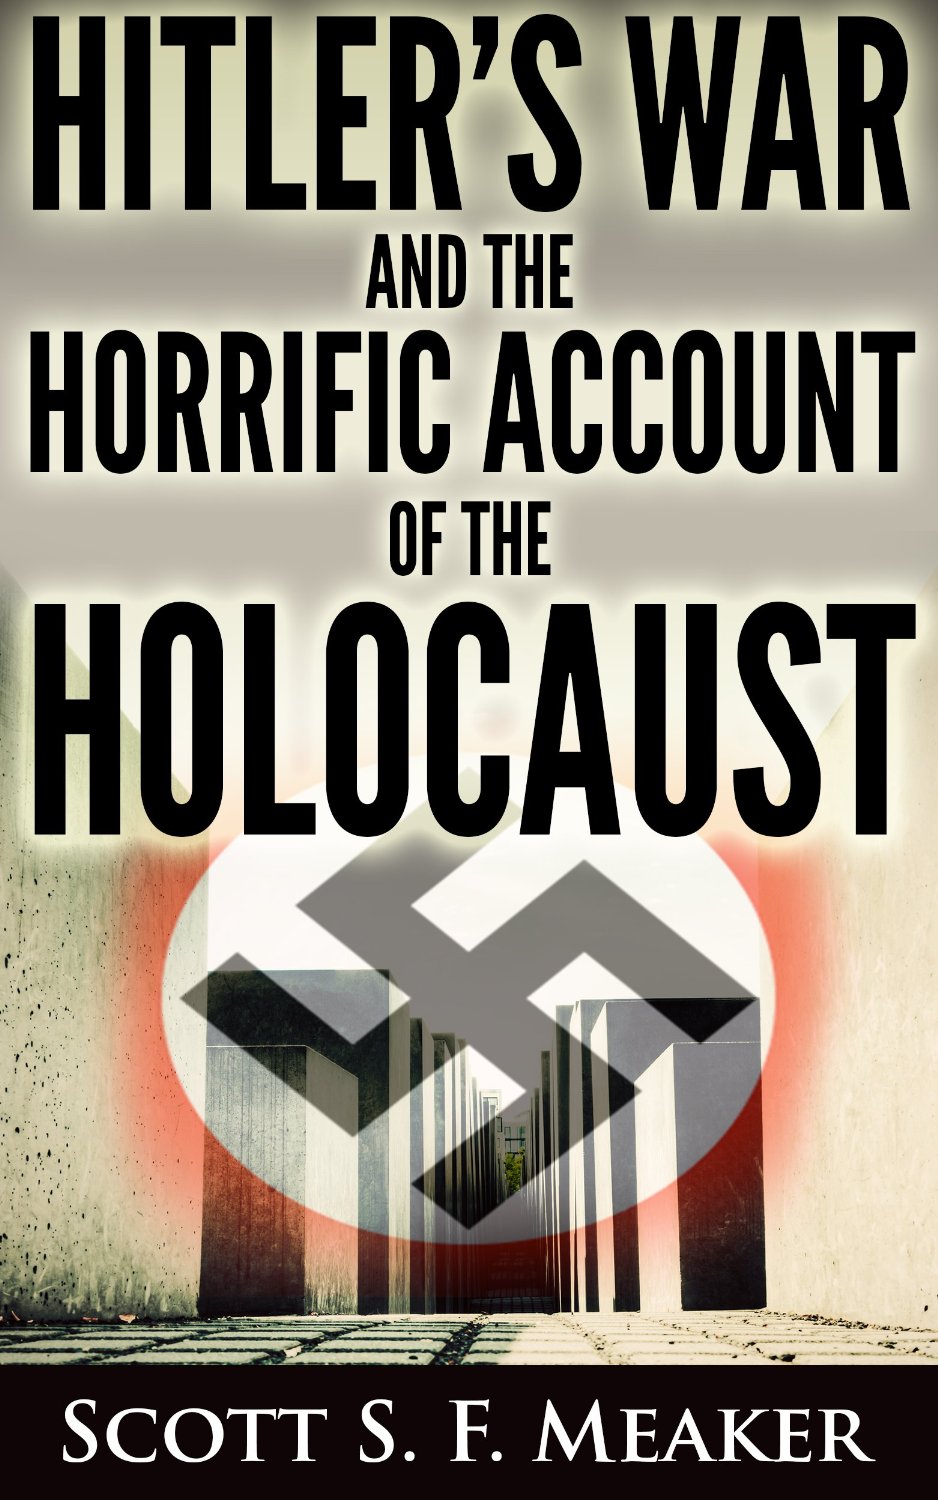 Hitler’s War and the Horrific Account of the Holocaust by Scott S. F. Meaker